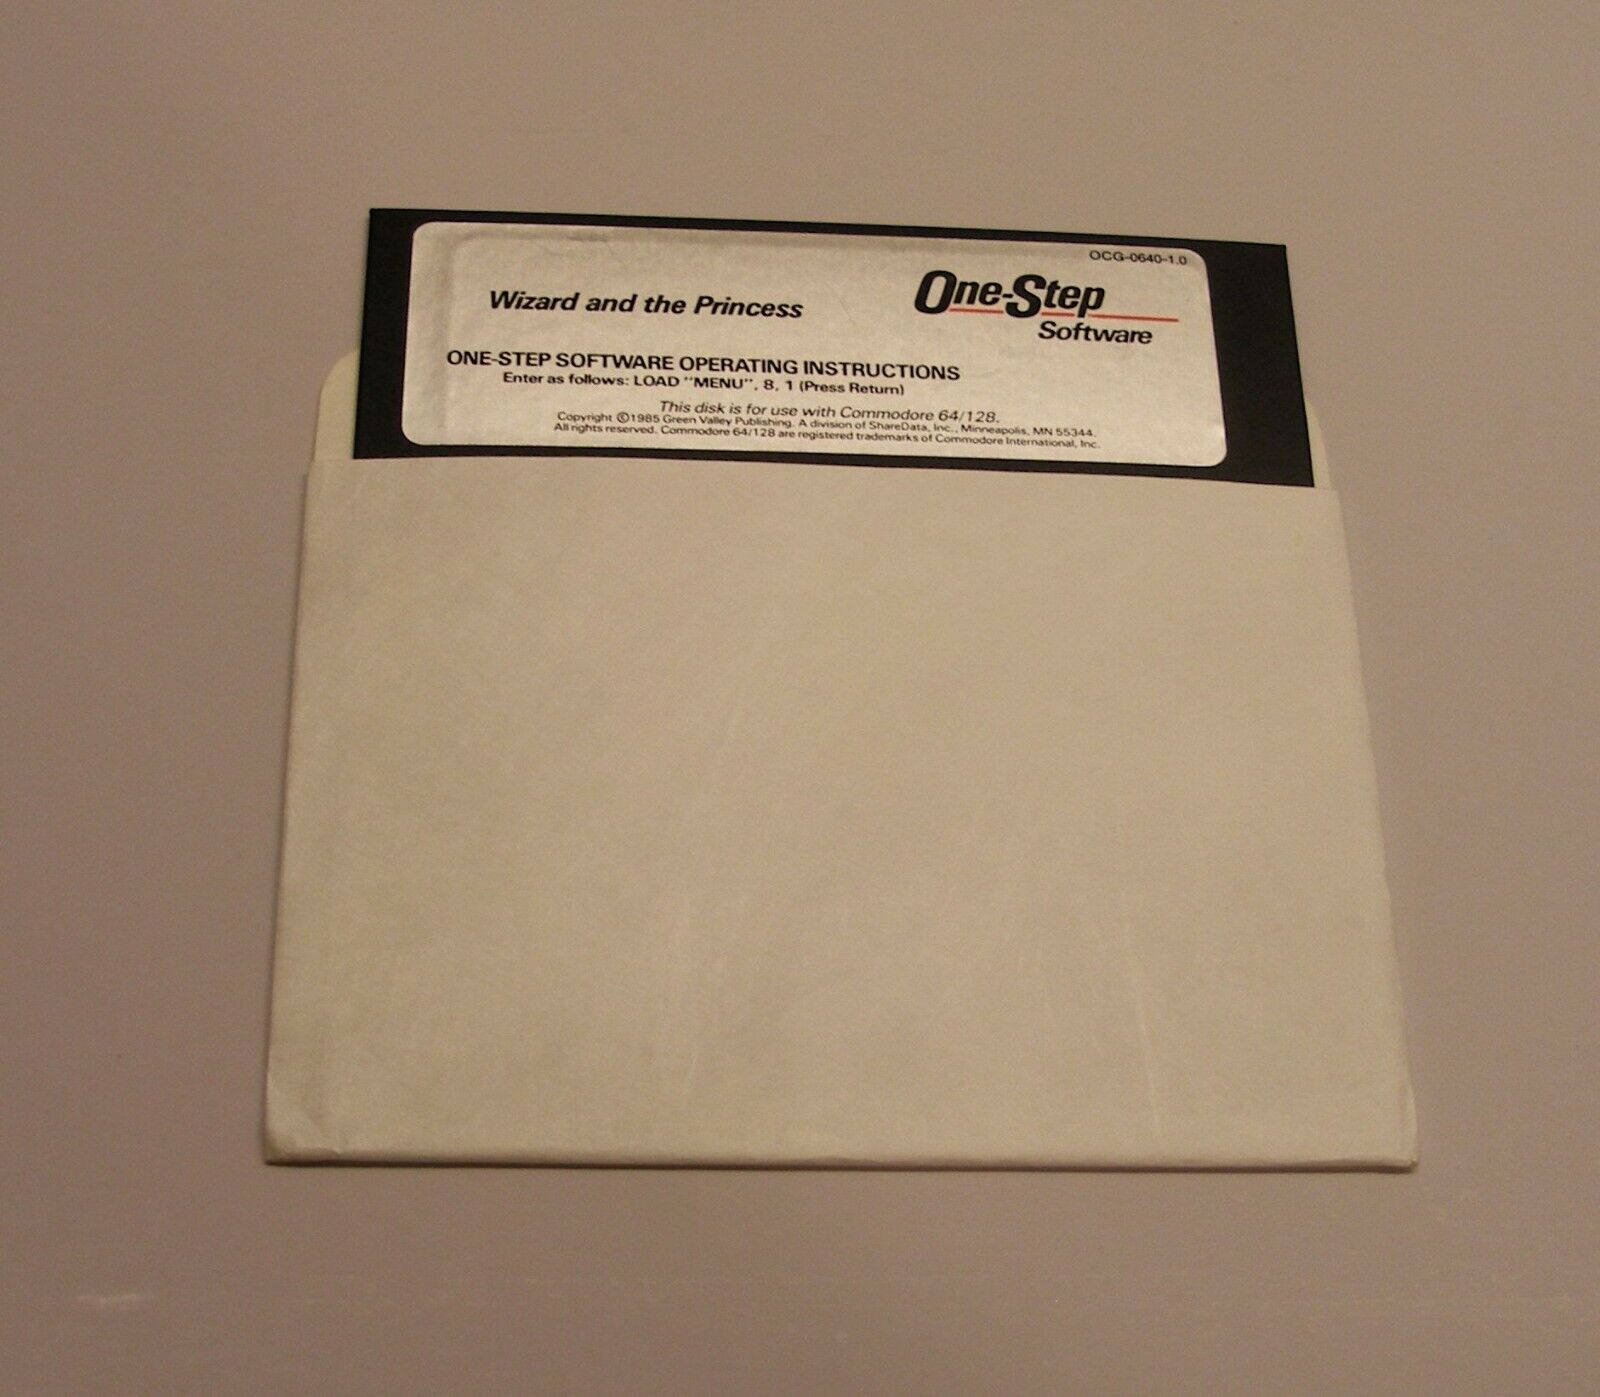 VERY RARE CLASSIC, Wizard and the Princess by Sierra On-line/One Step for C-64